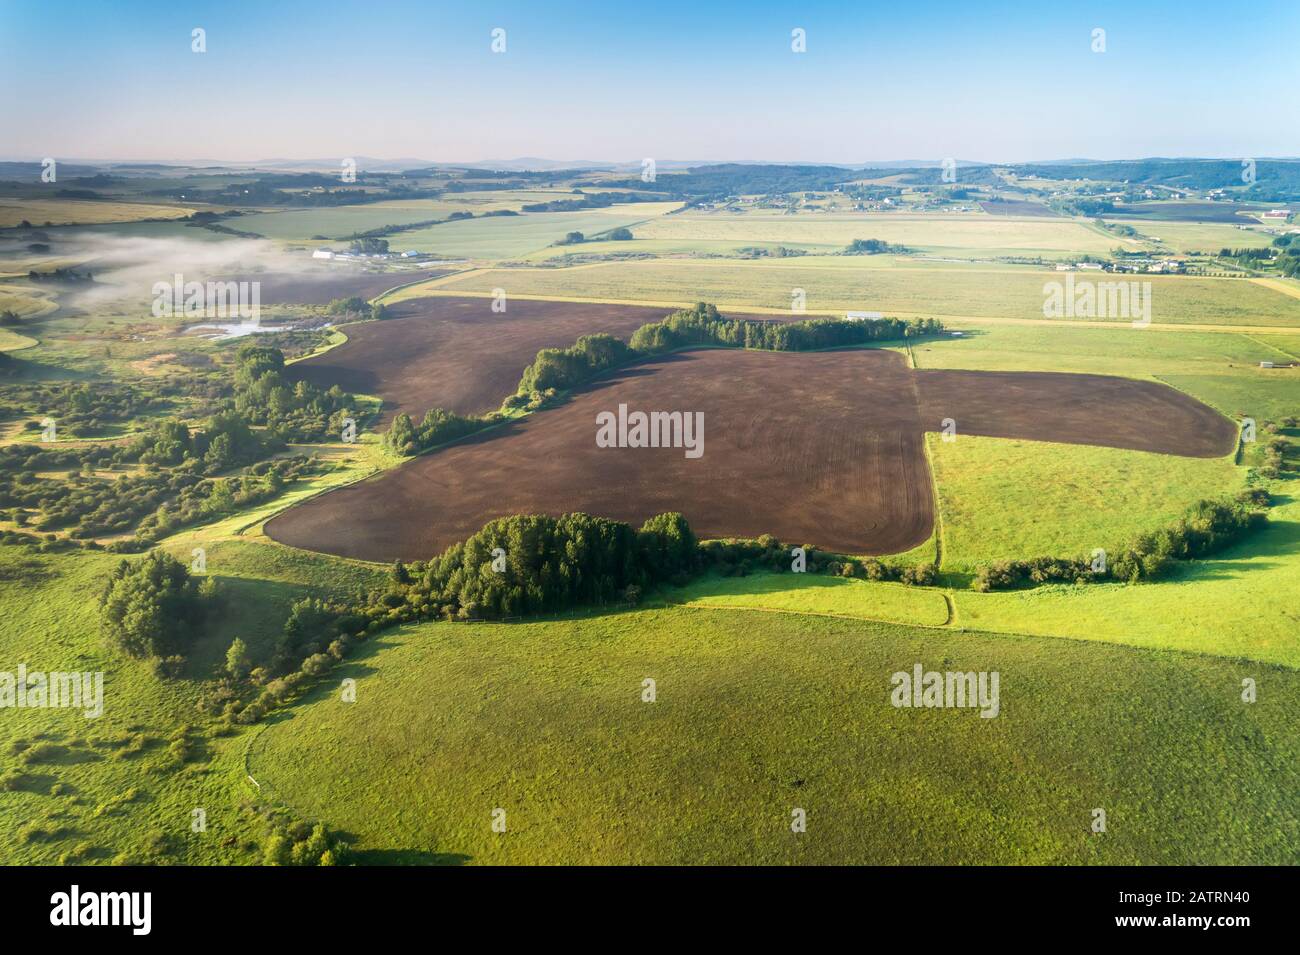 Aerial view of a dark clean soil field surrounded by trees and green fields, West of Calgary; Alberta, Canada Stock Photo